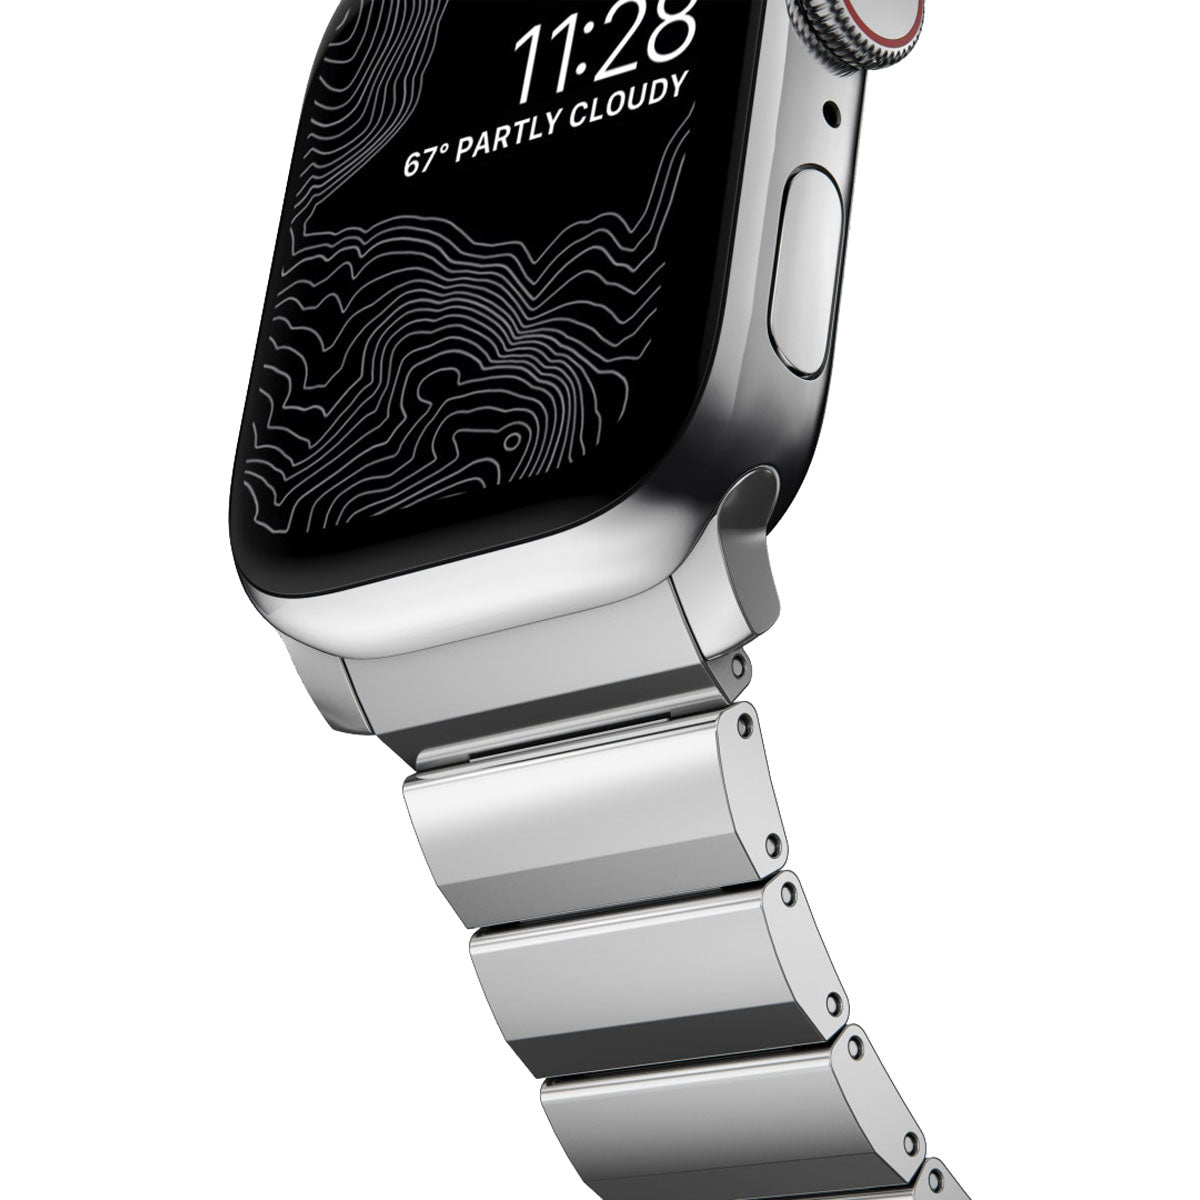 Nomad Apple Watch 41mm Steel Band - Silver Hardware.